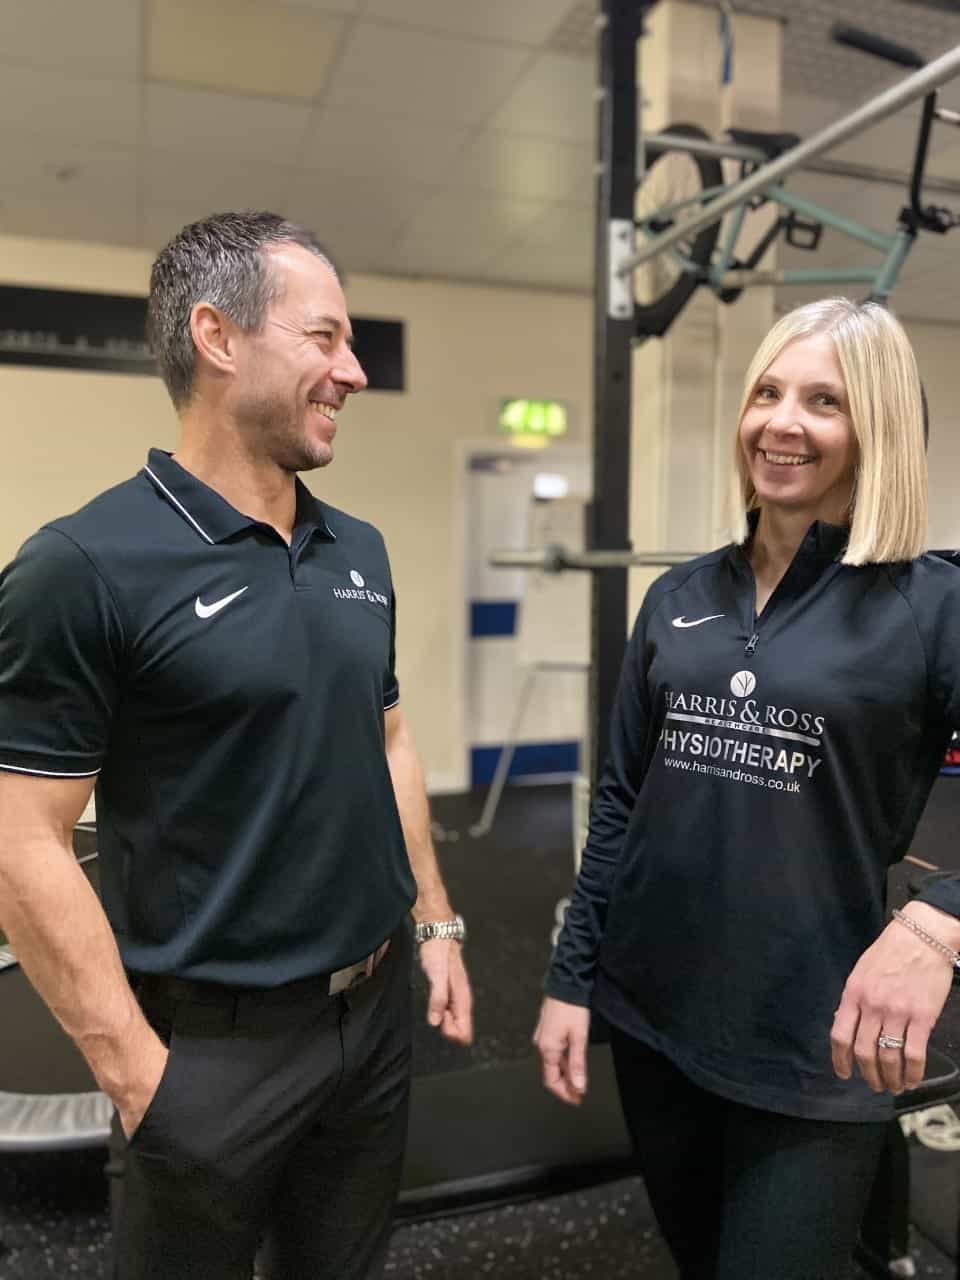 Harris & Ross Physiotherapy – Wigan